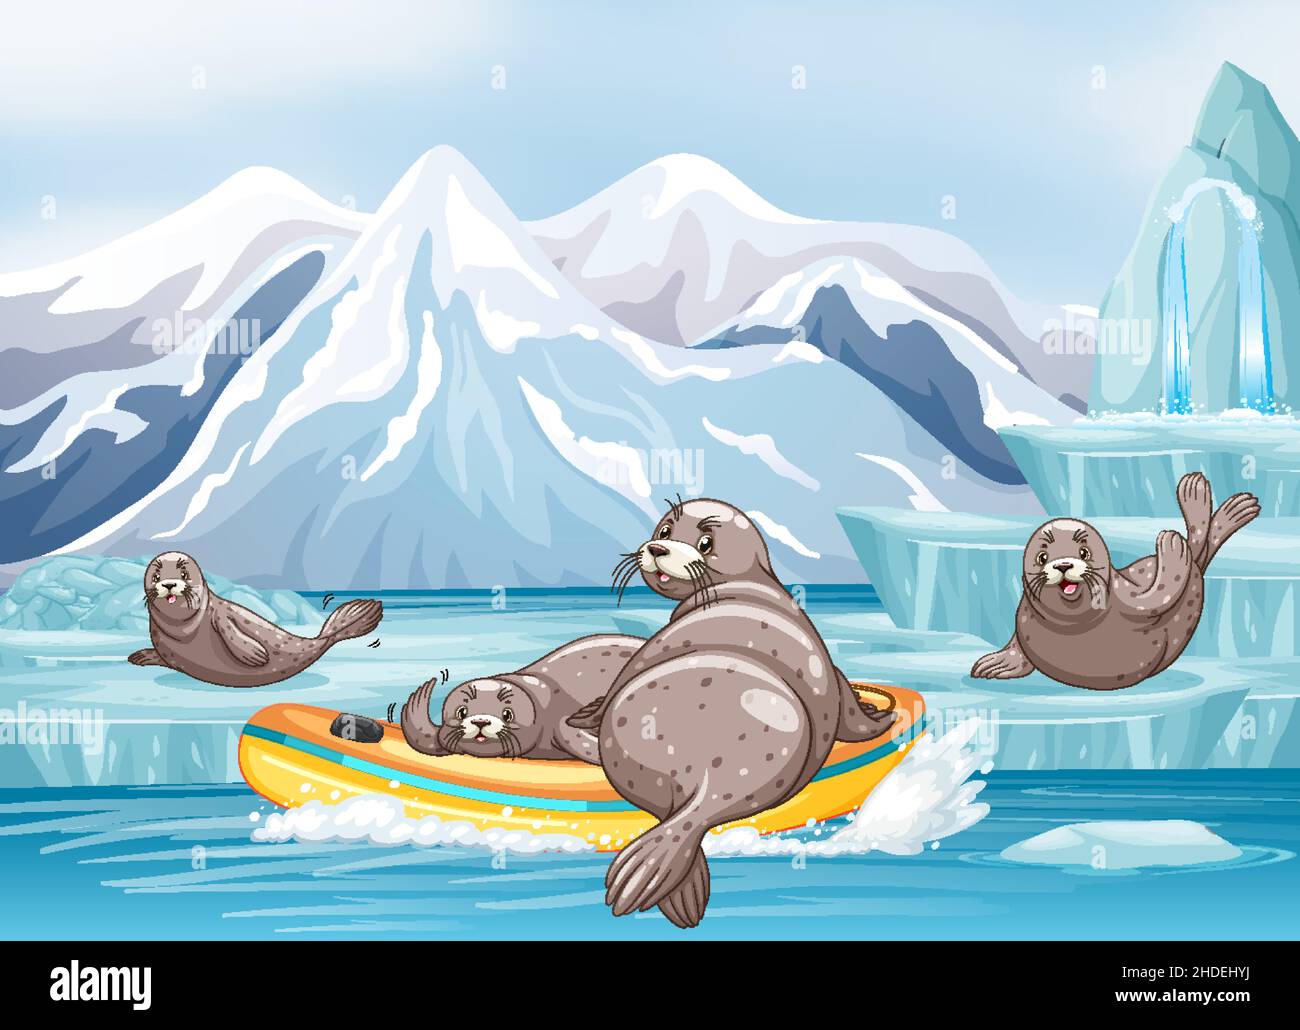 Antarctica landscape with seal in inflatable boat illustration Stock Vector